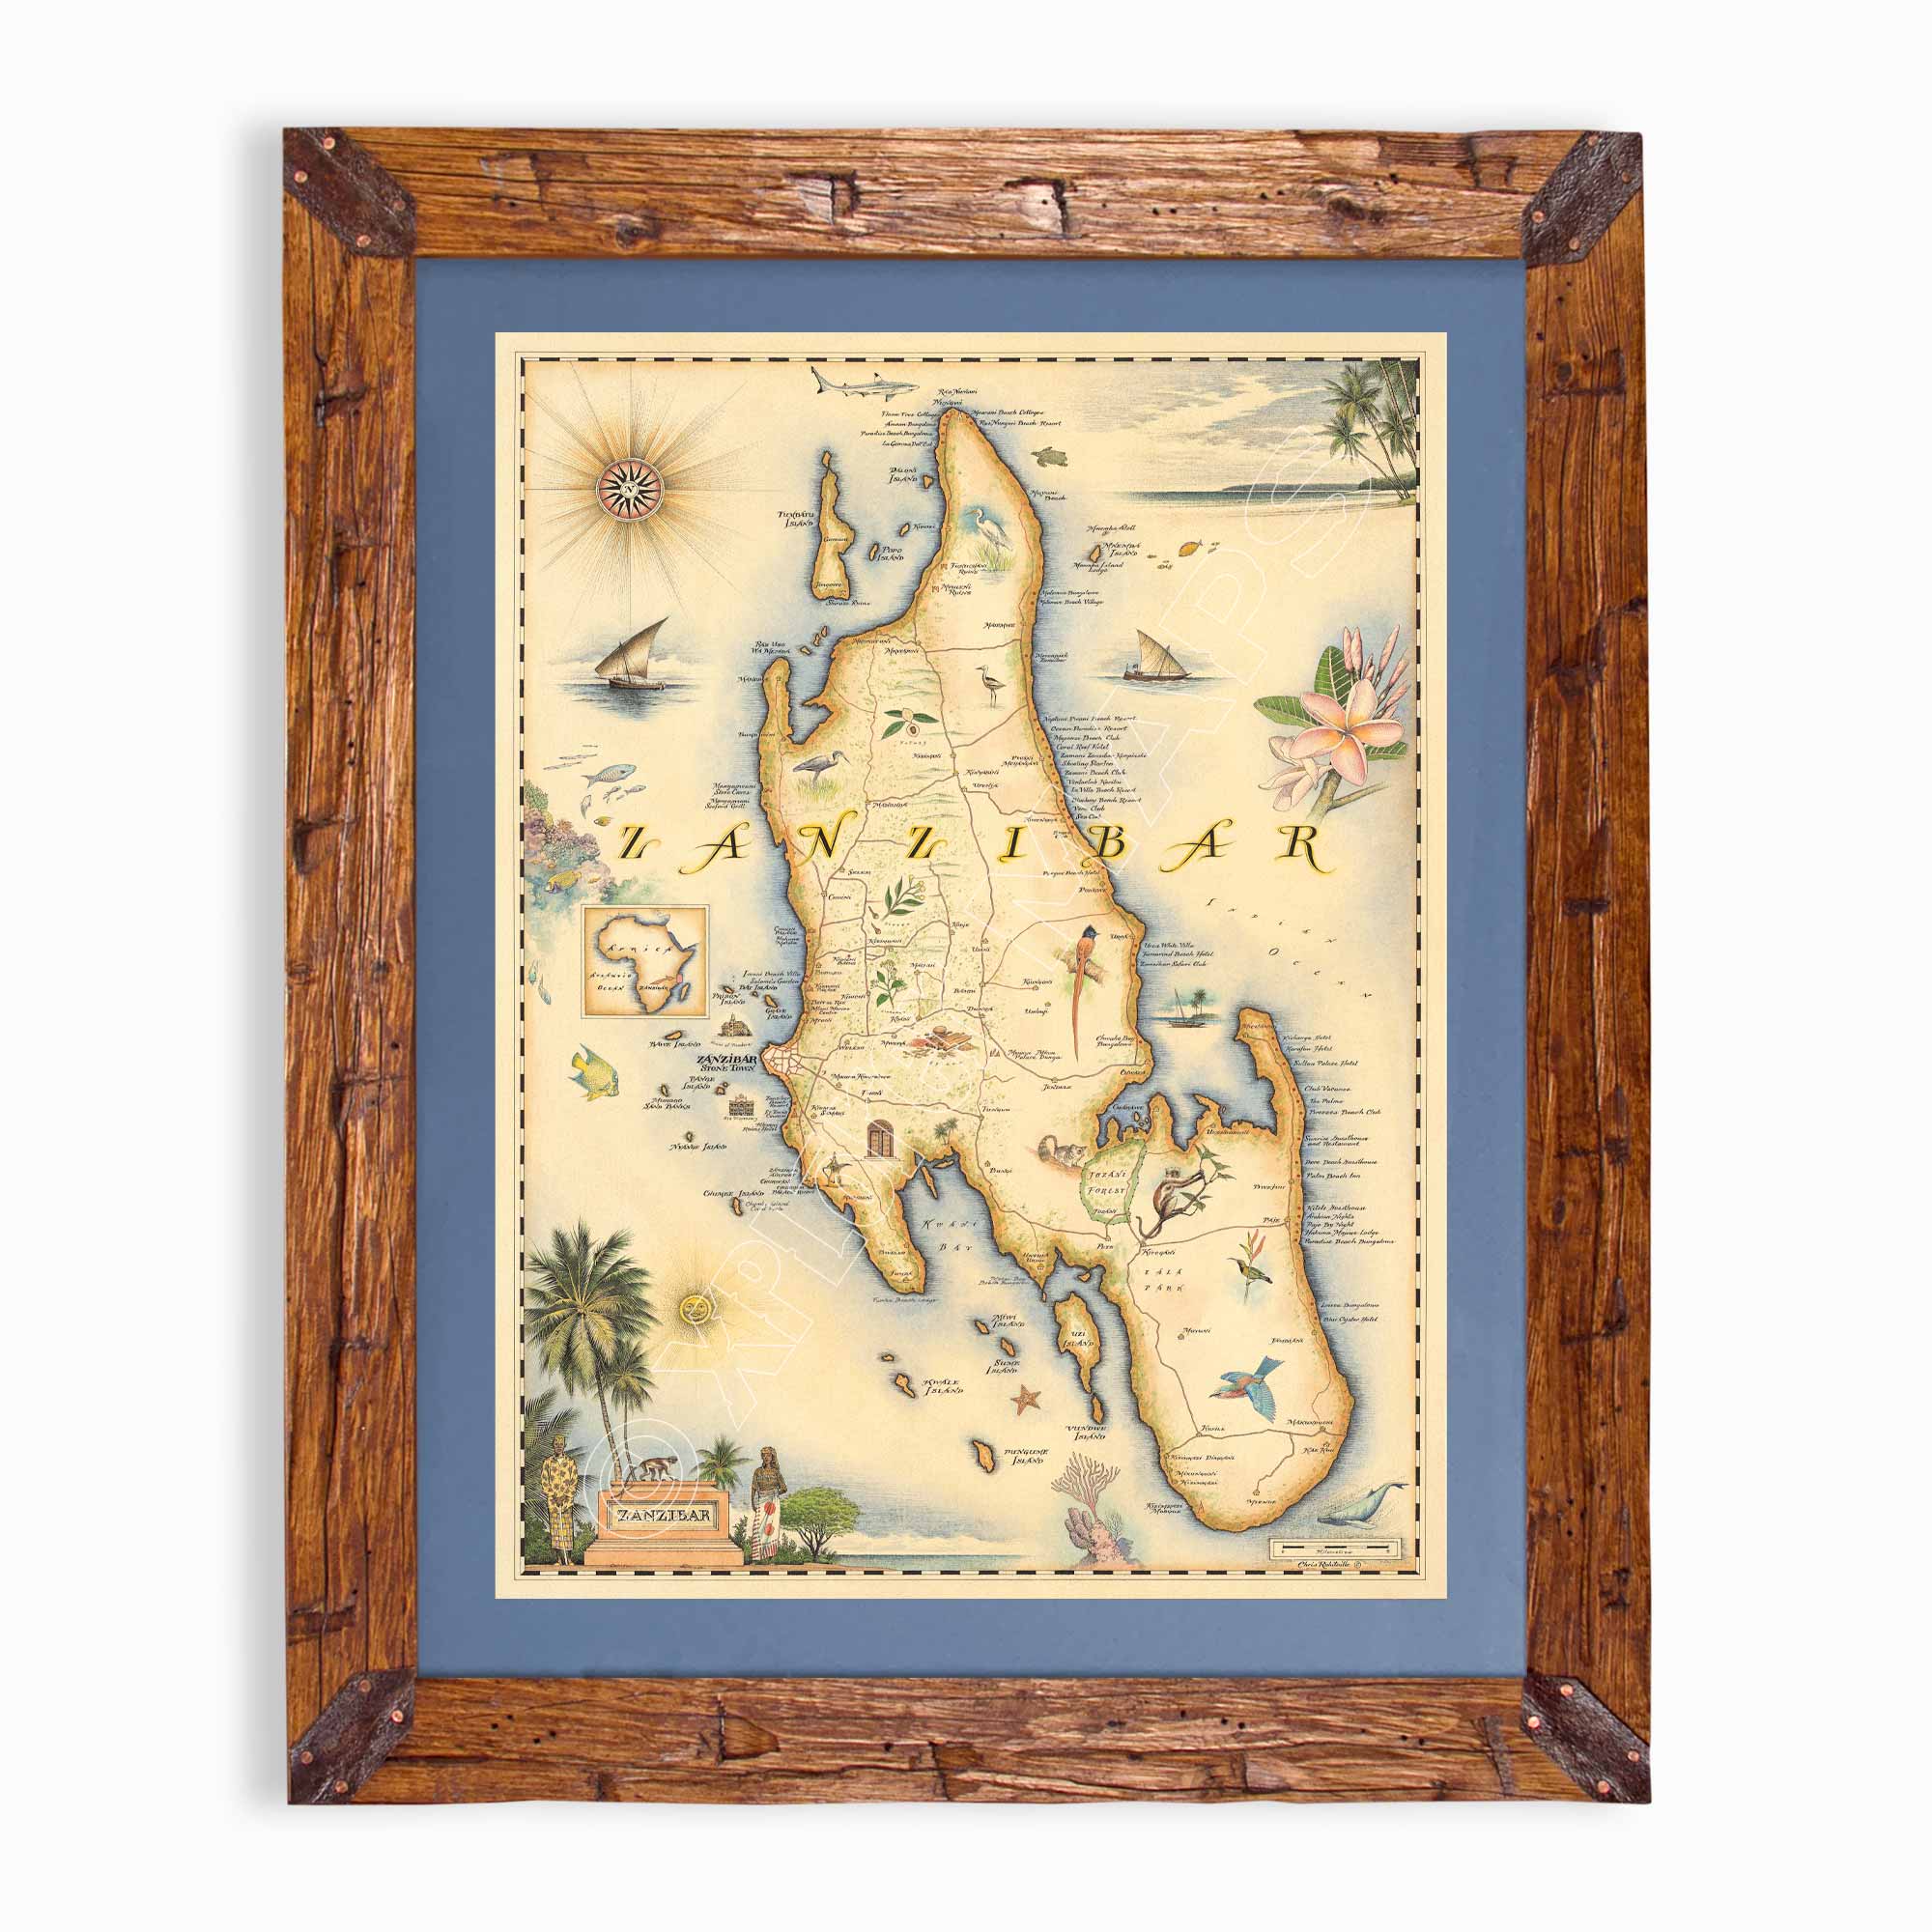 Africa's Zanzibar hand-drawn map in earth tones blues and greens. The map print is framed in Montana hand-scraped pine with a blue mat.